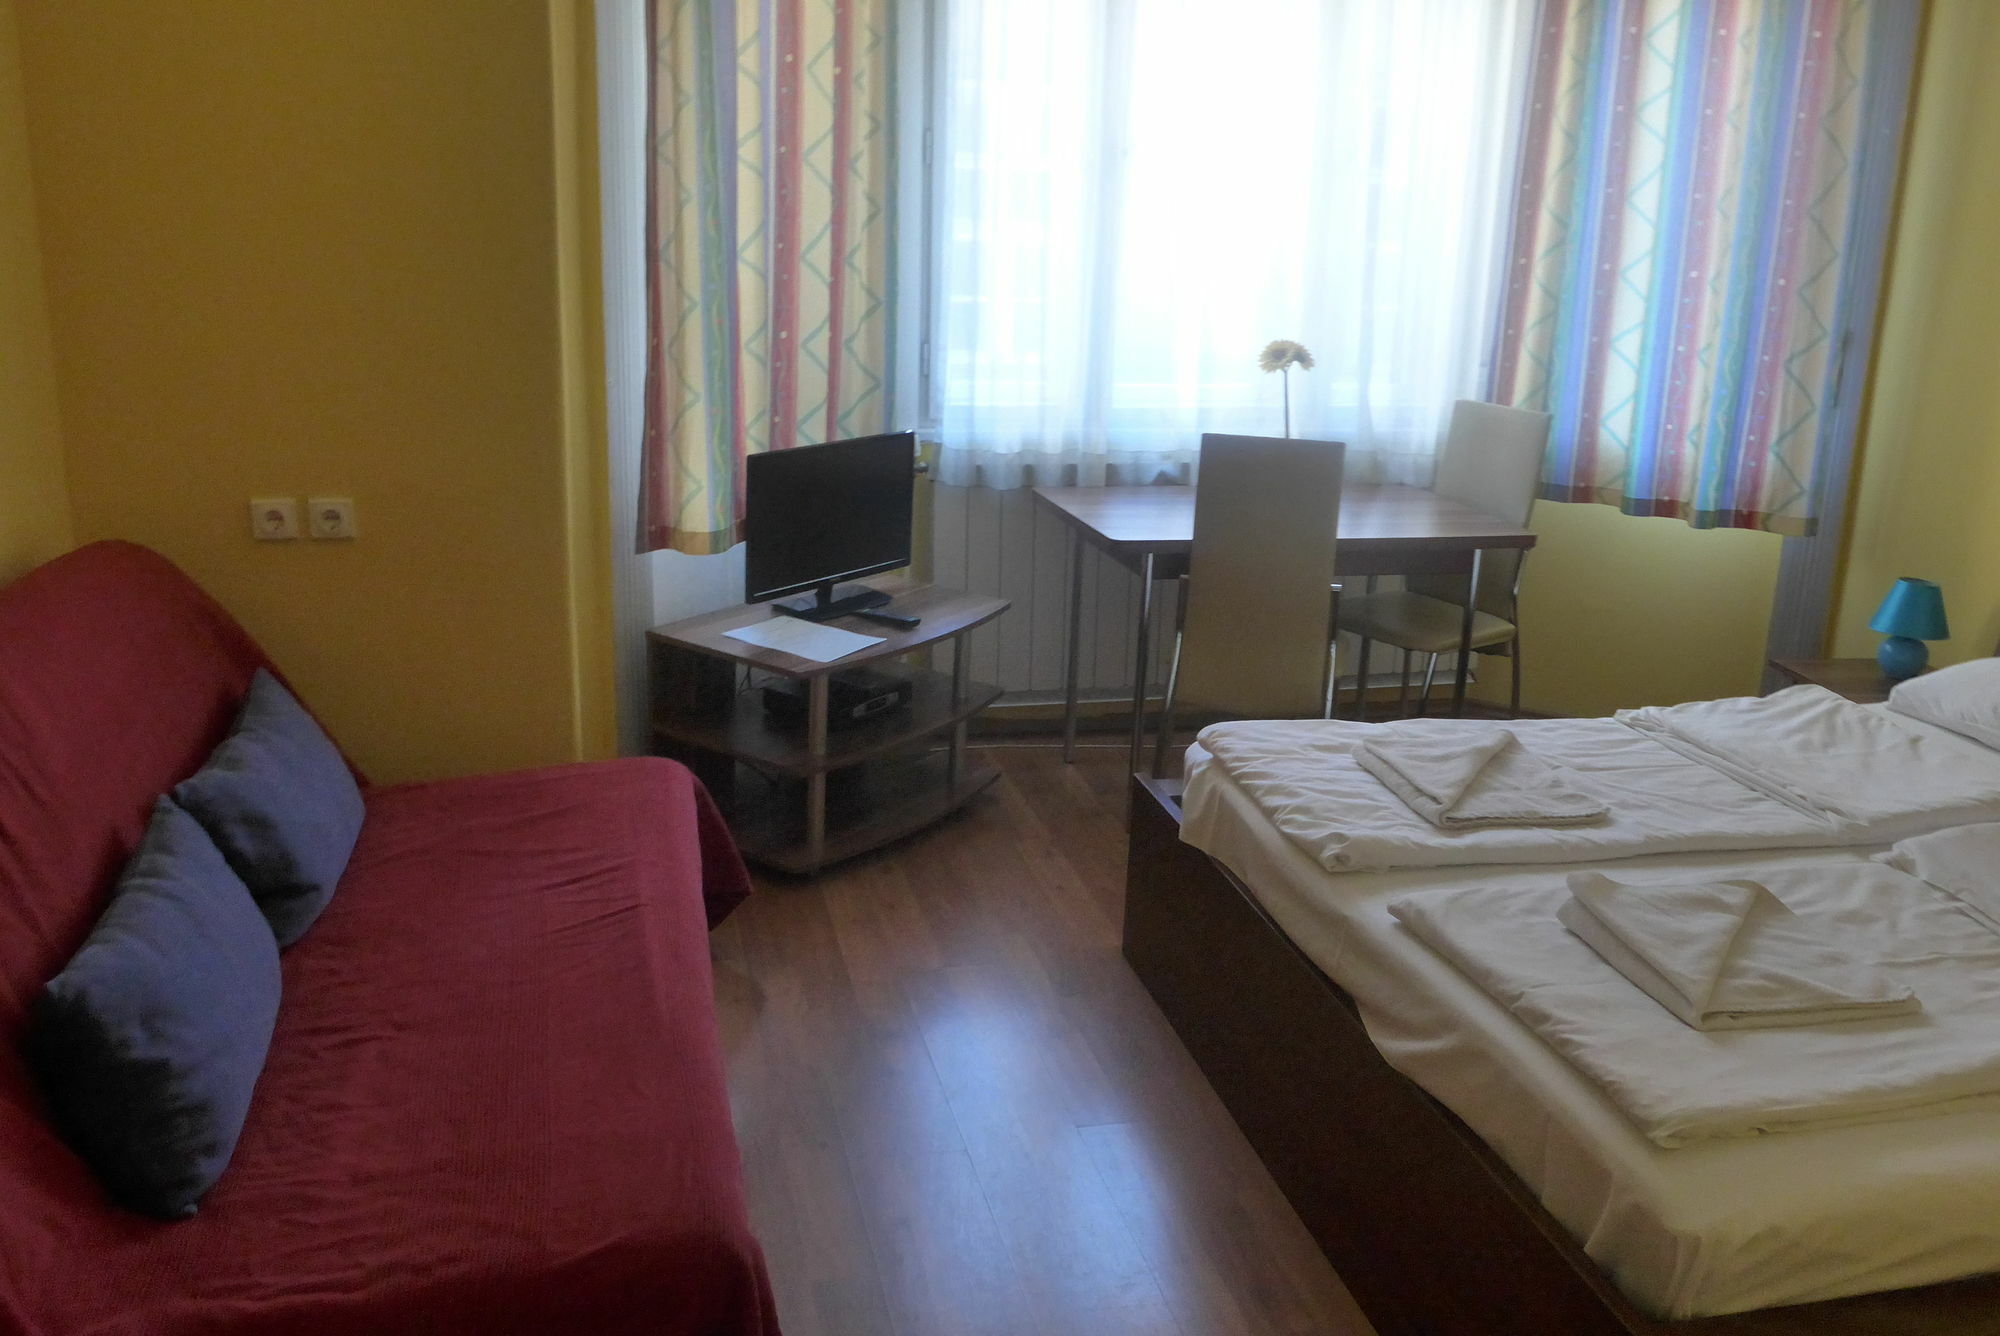 HOTEL AMBER TERRACE STUDIOS BUDAPEST 3* (Hungary) - from US$ 48 | BOOKED